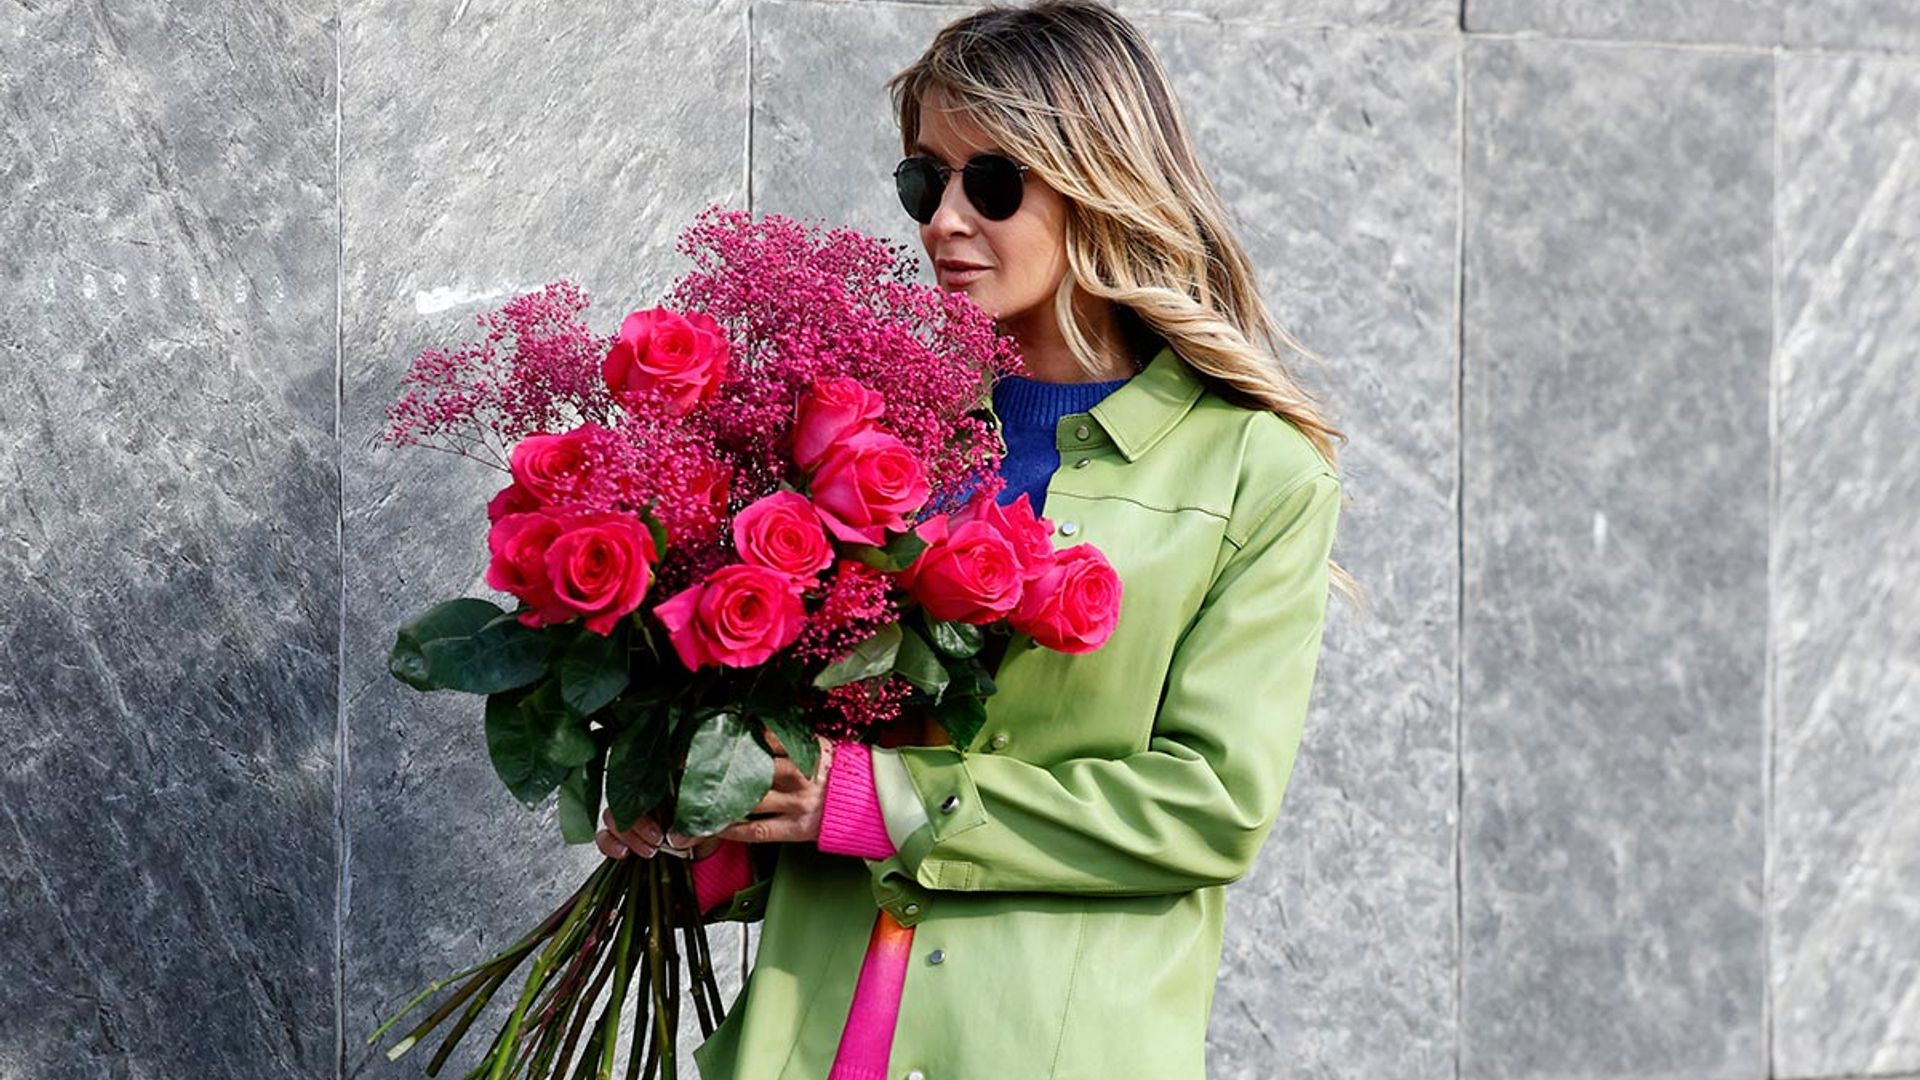 The Chelsea Flower Show 2022: Best dresses & accessories to be blooming stylish